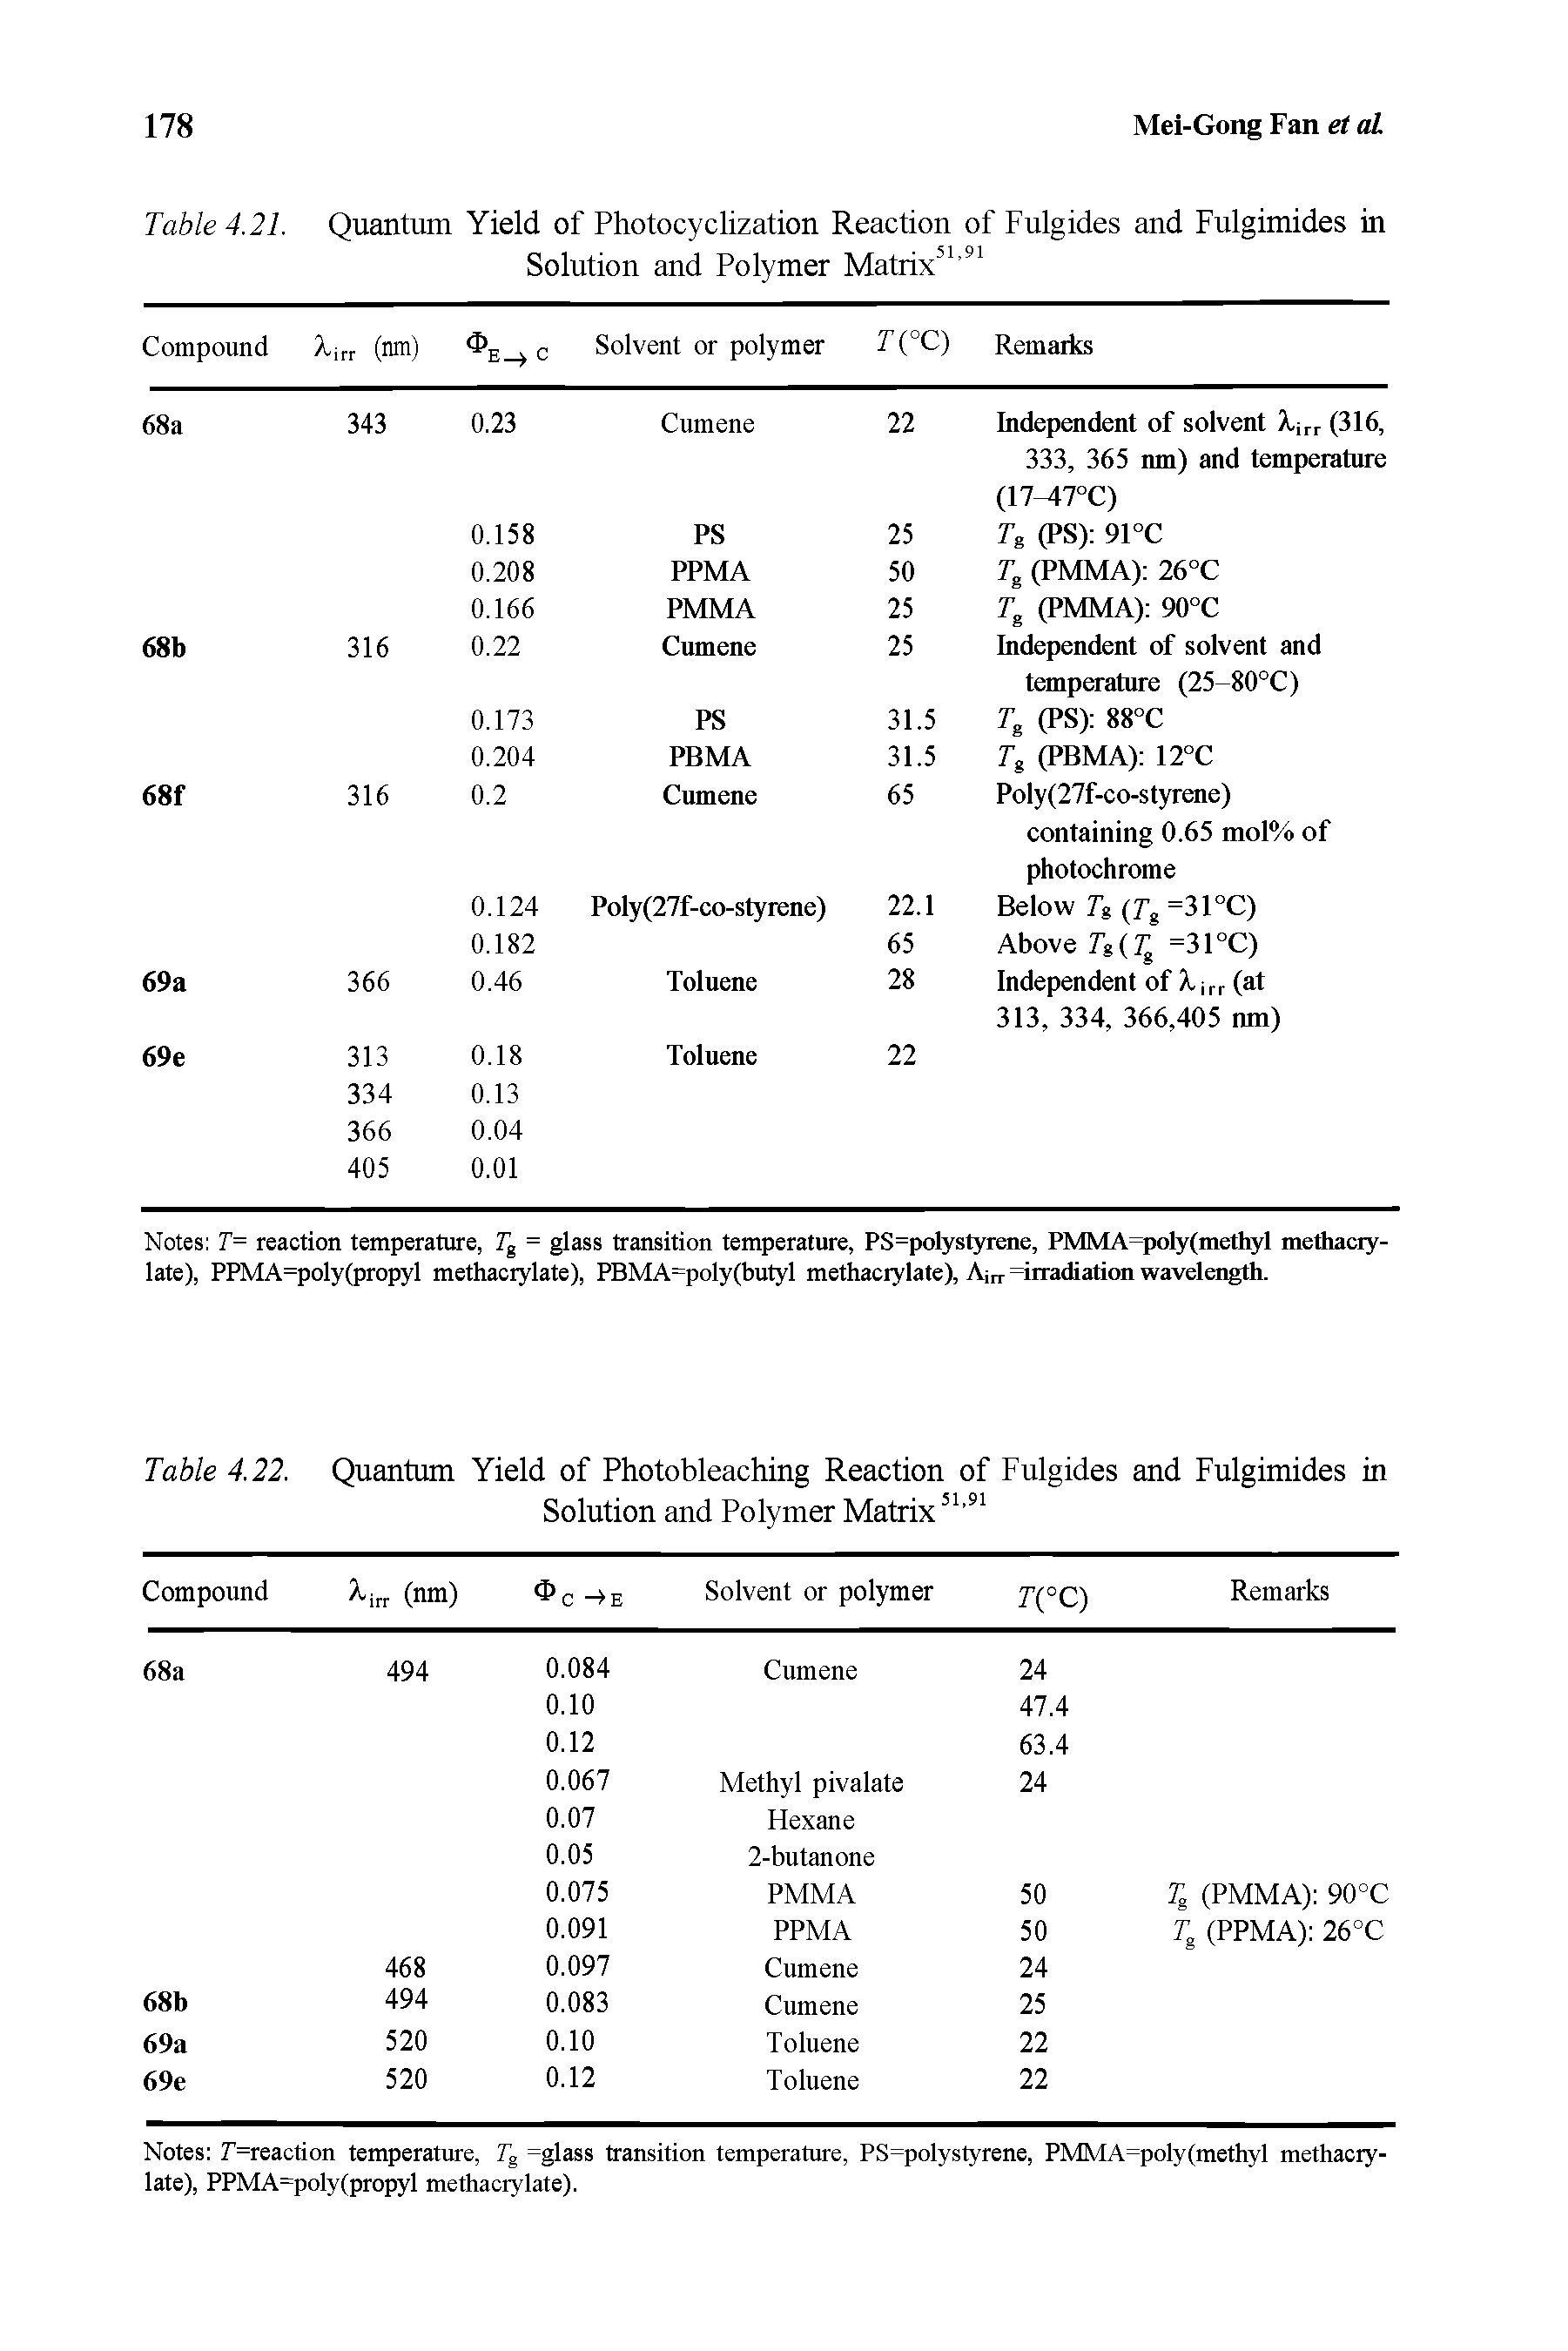 Table 4.21. Quantum Yield of Photocyclization Reaction of Fulgides and Fulgimides in Solution and Polymer Matrix51 91...